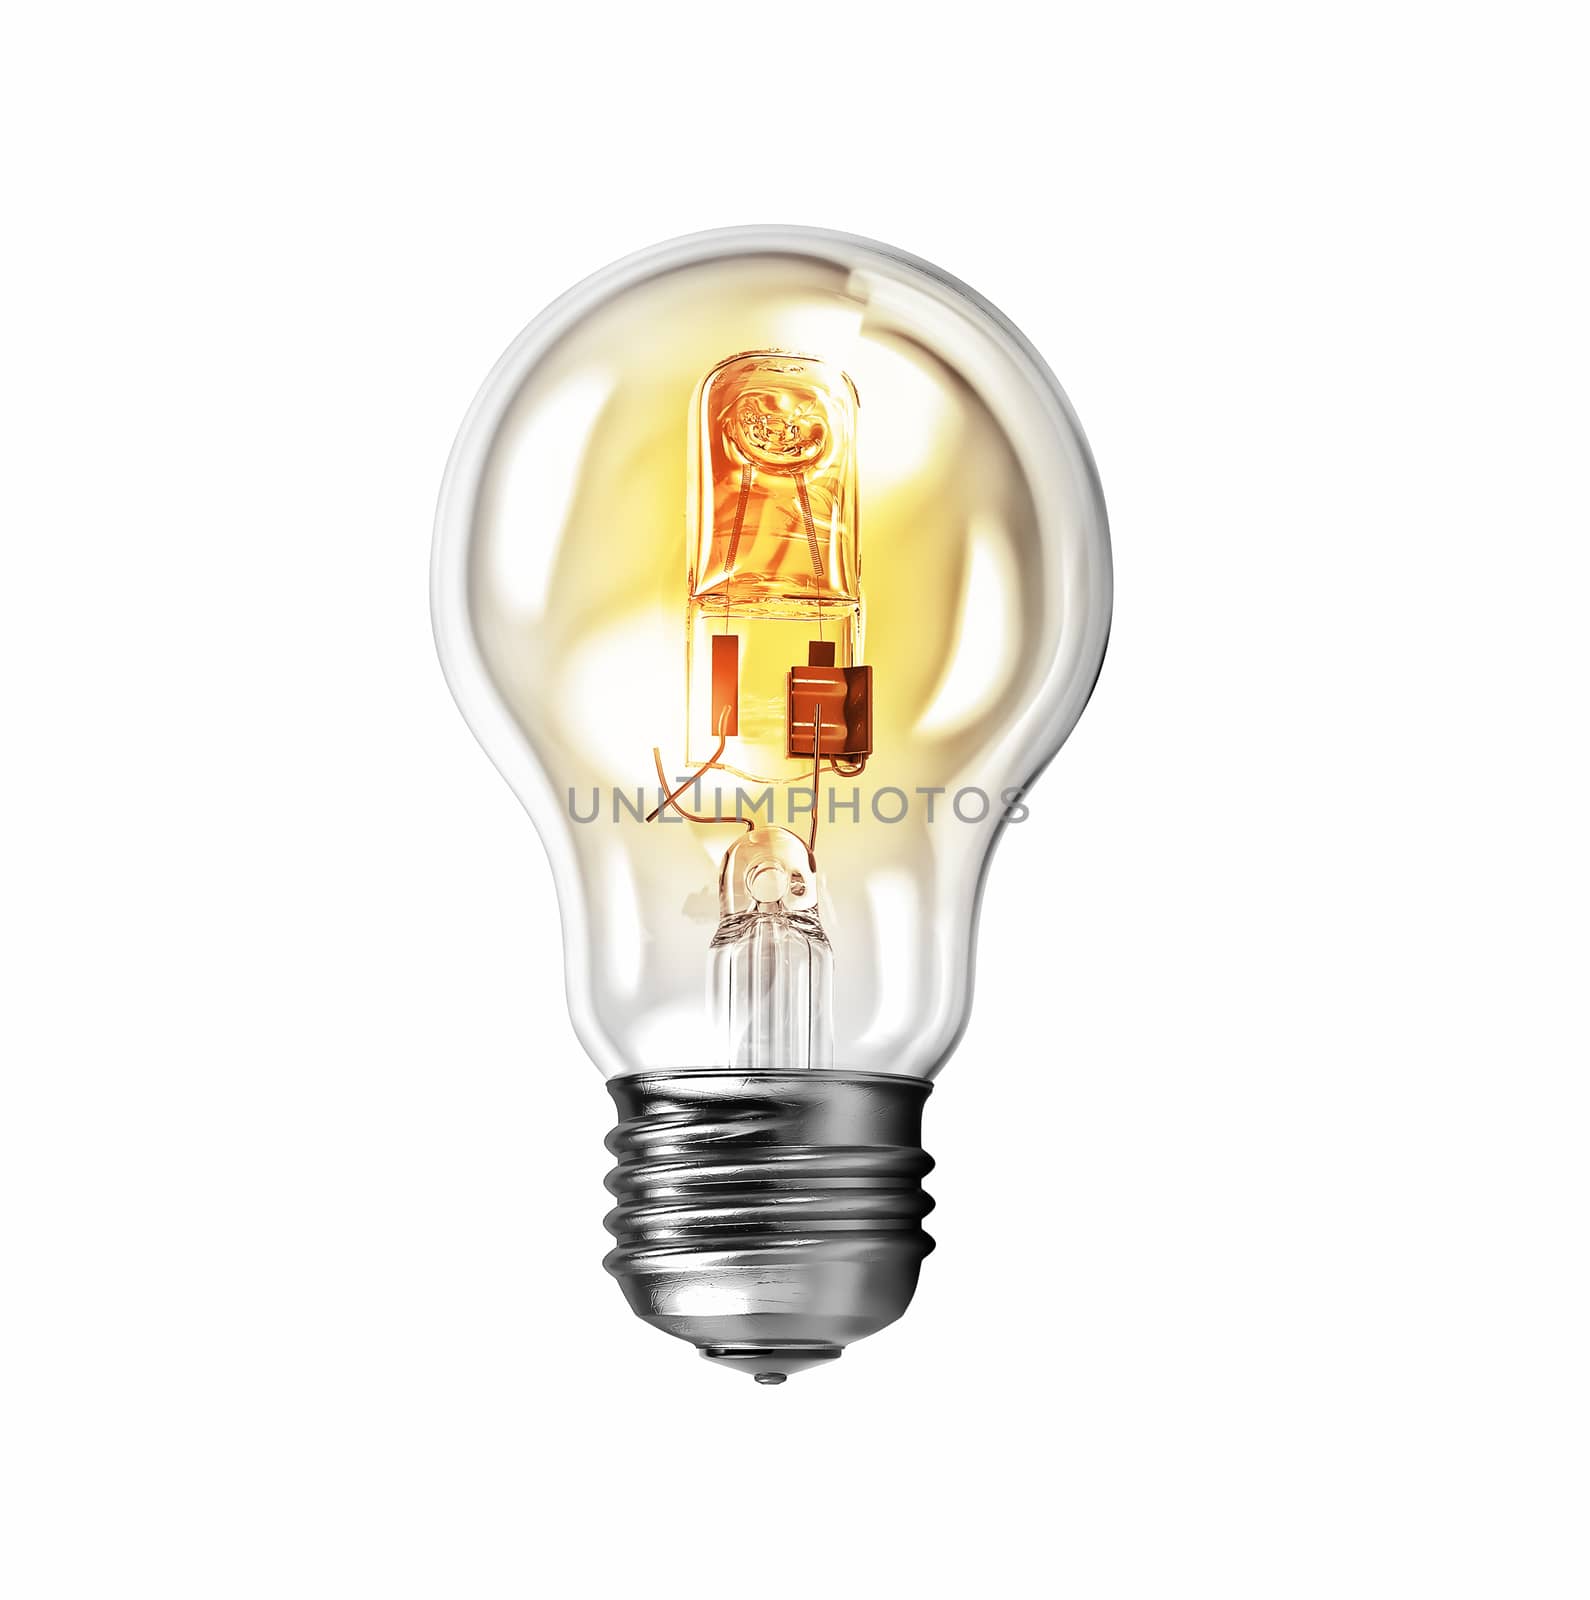 Modern glowing lamp bulb on a white background, concept of creativity